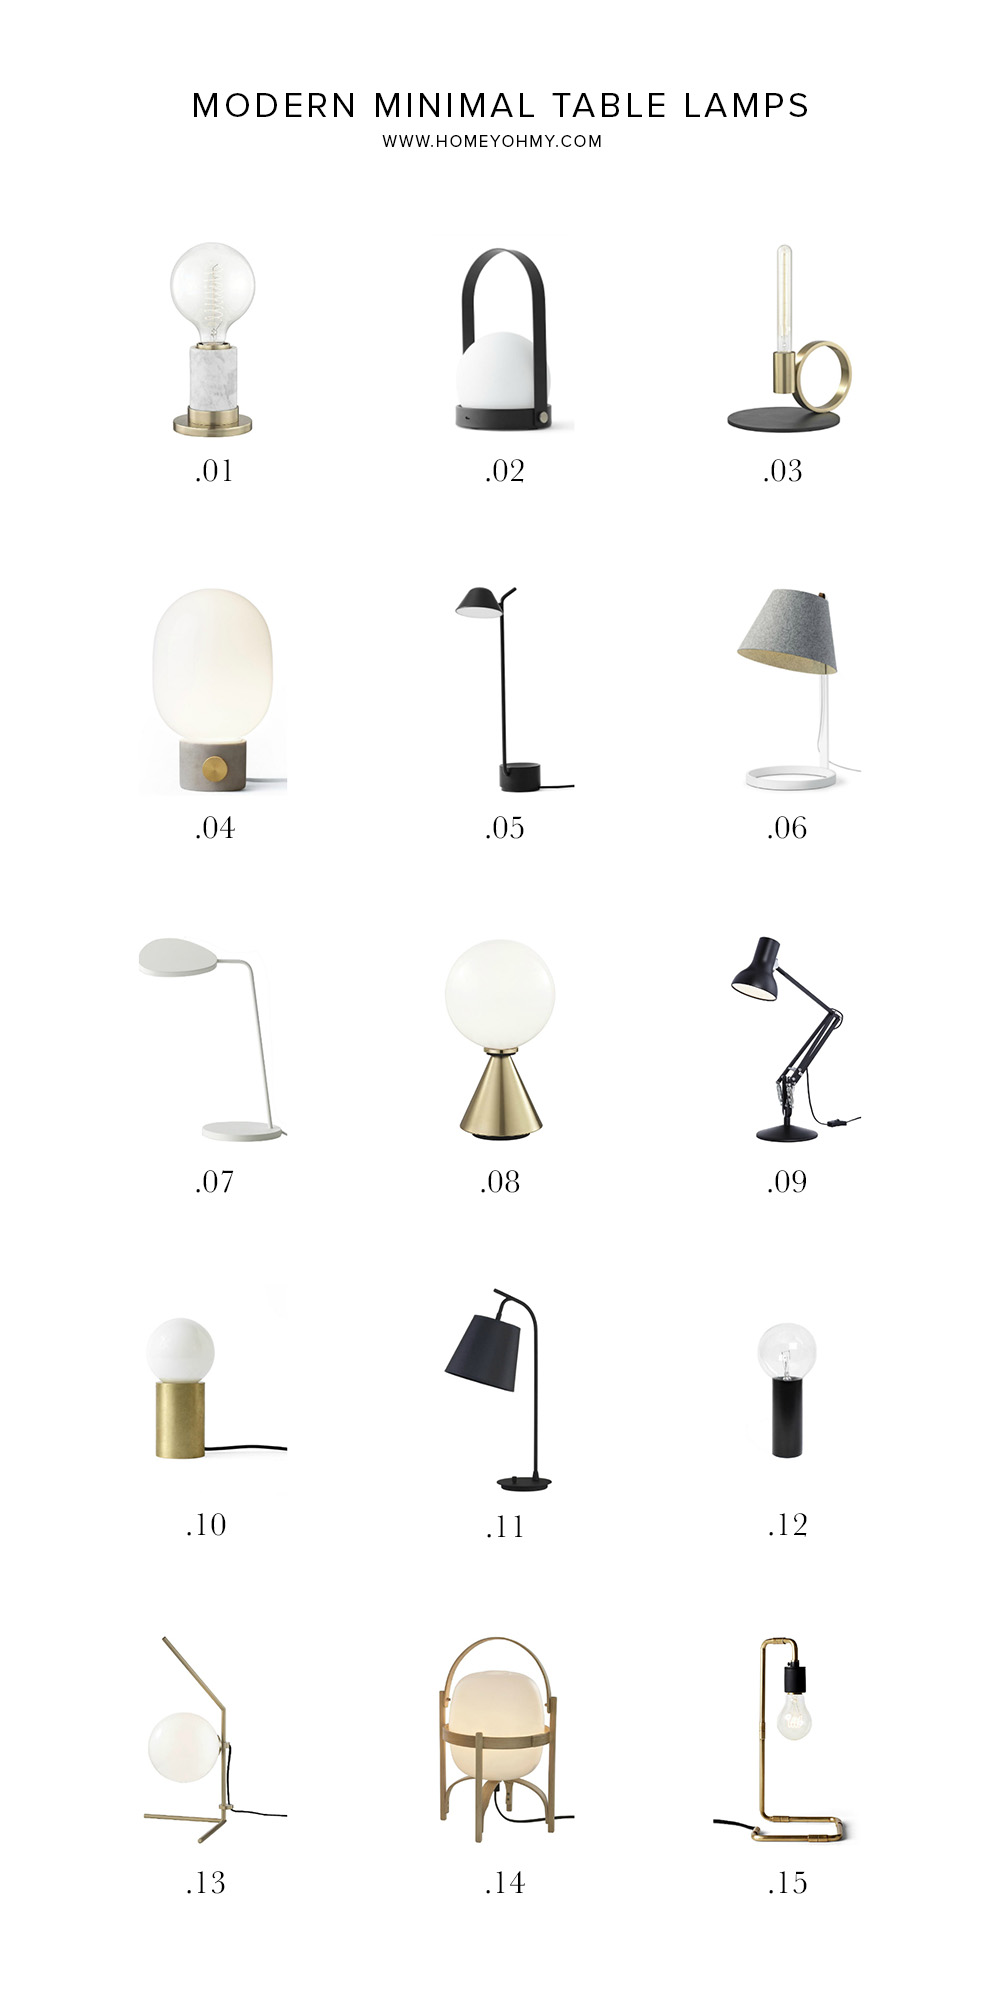 15 Modern Minimal Table Lamps - Homey Oh My